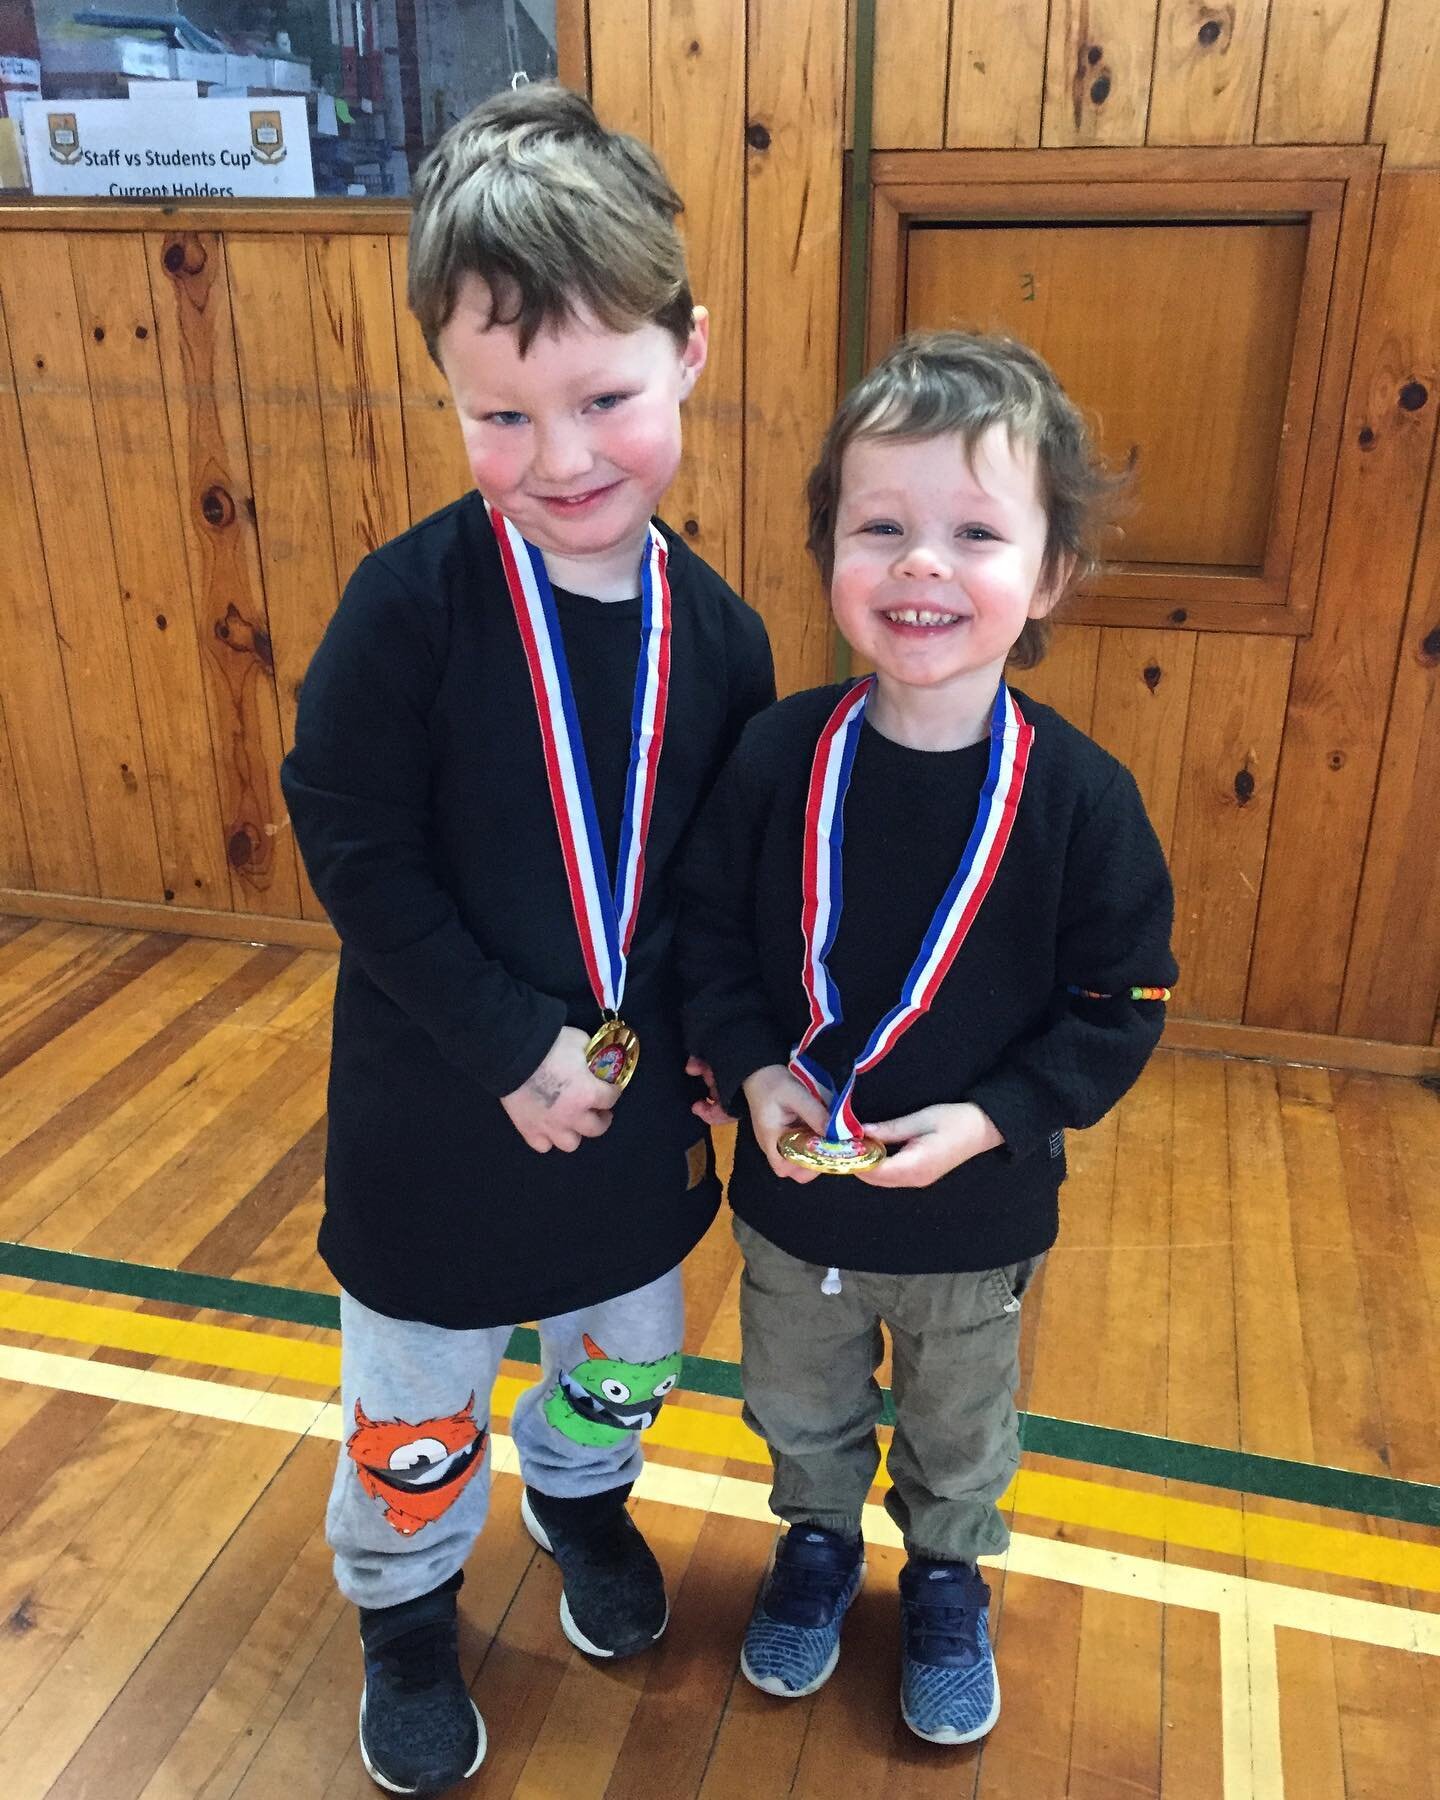 We had a blast at our public lessons this morning, thank you to all of the Playballers that came along and joined in the fun!

A big well-done to brothers Harrison &amp; Arthur who were our Playball medal winners today! 🥇✨

#PlayballDunedin #Playbal